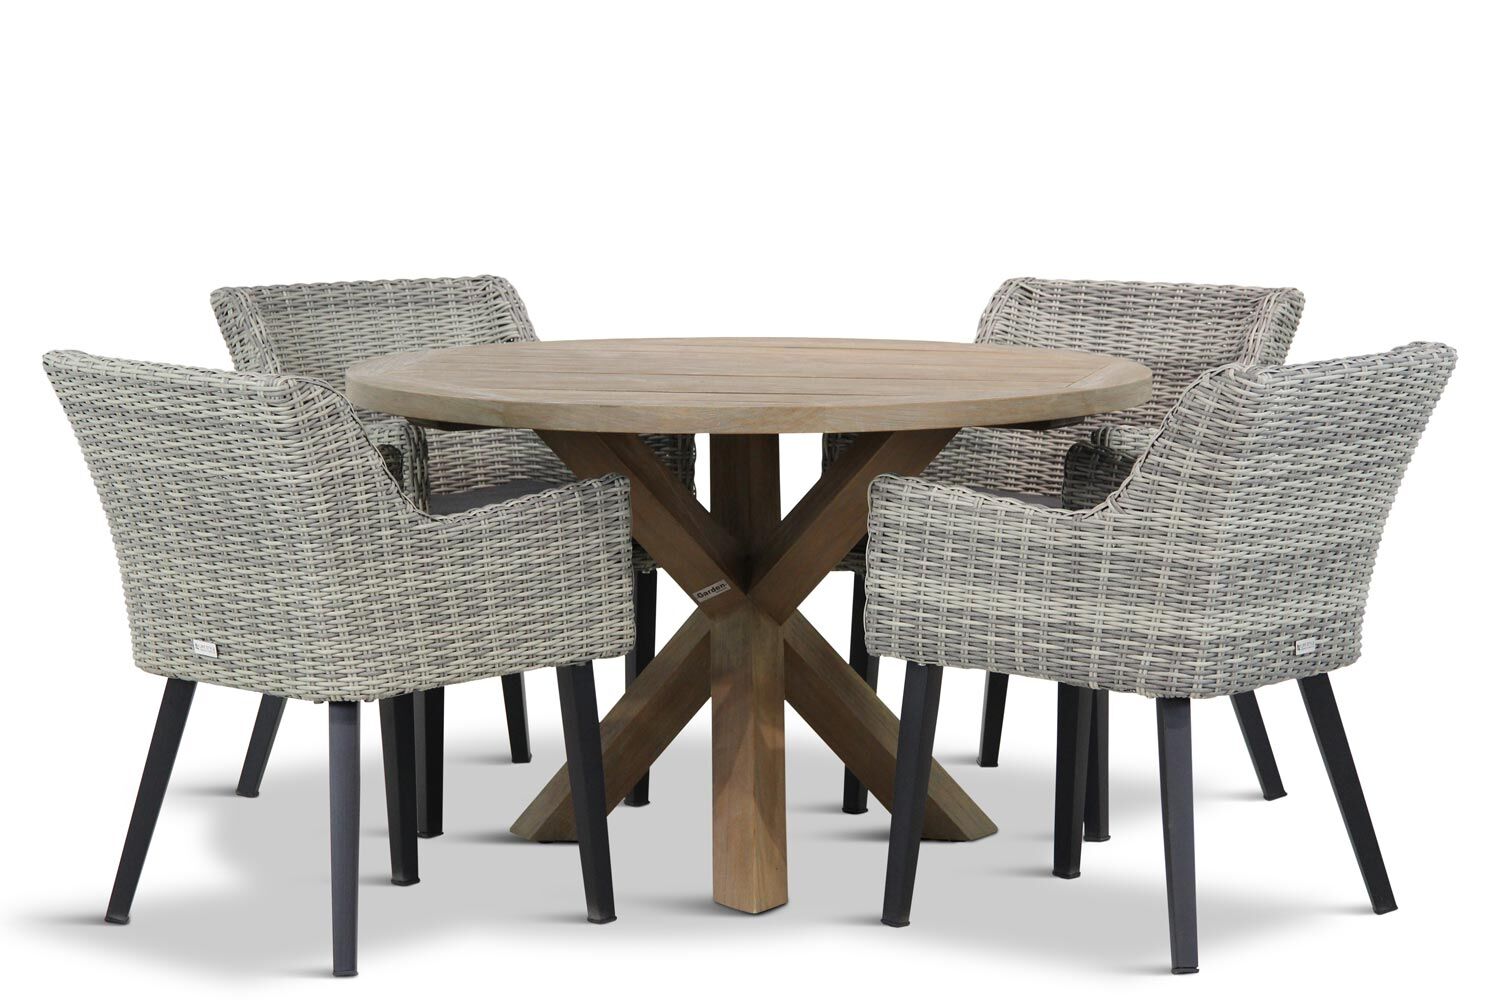 Garden Collections Milton/Sand City rond 120 cm dining tuinset 5-delig - Grijs-antraciet